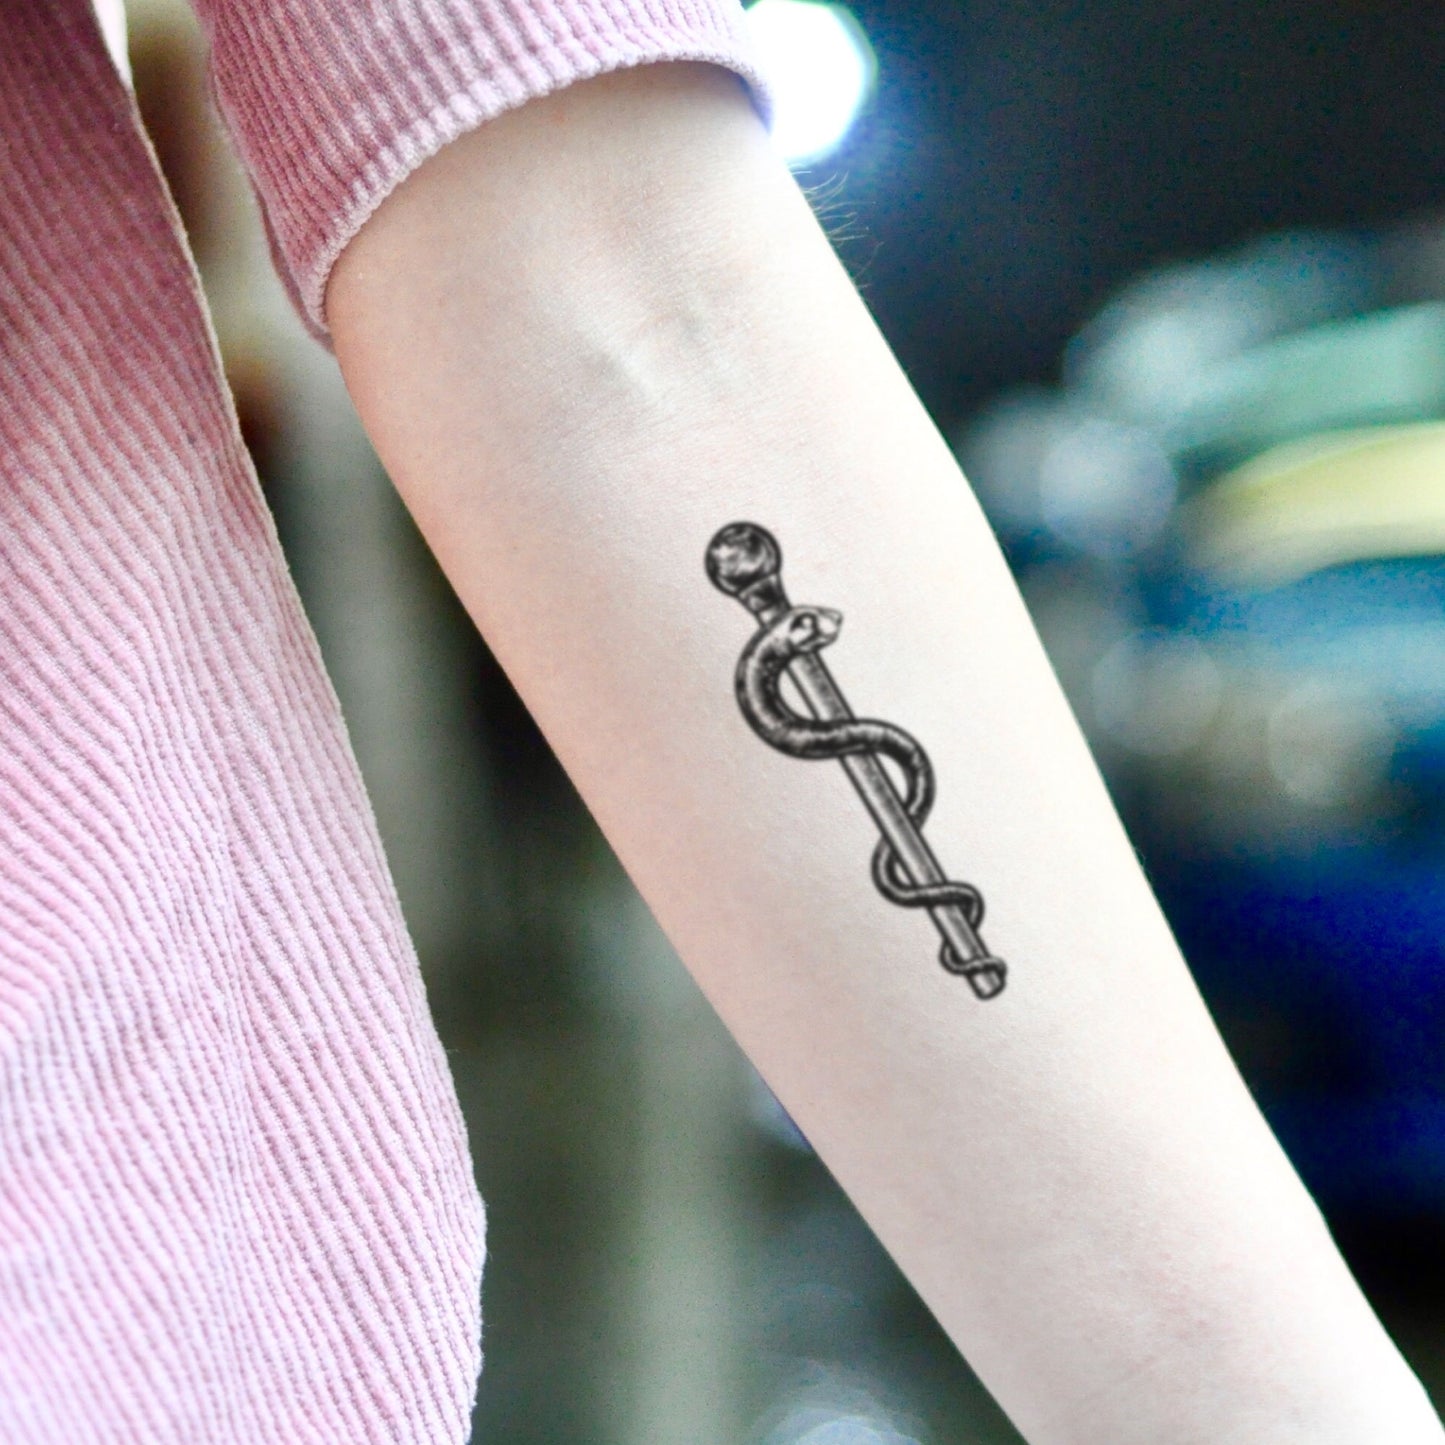 fake small staff rod of asclepius snake nuring medical illustrative temporary tattoo sticker design idea on inner arm